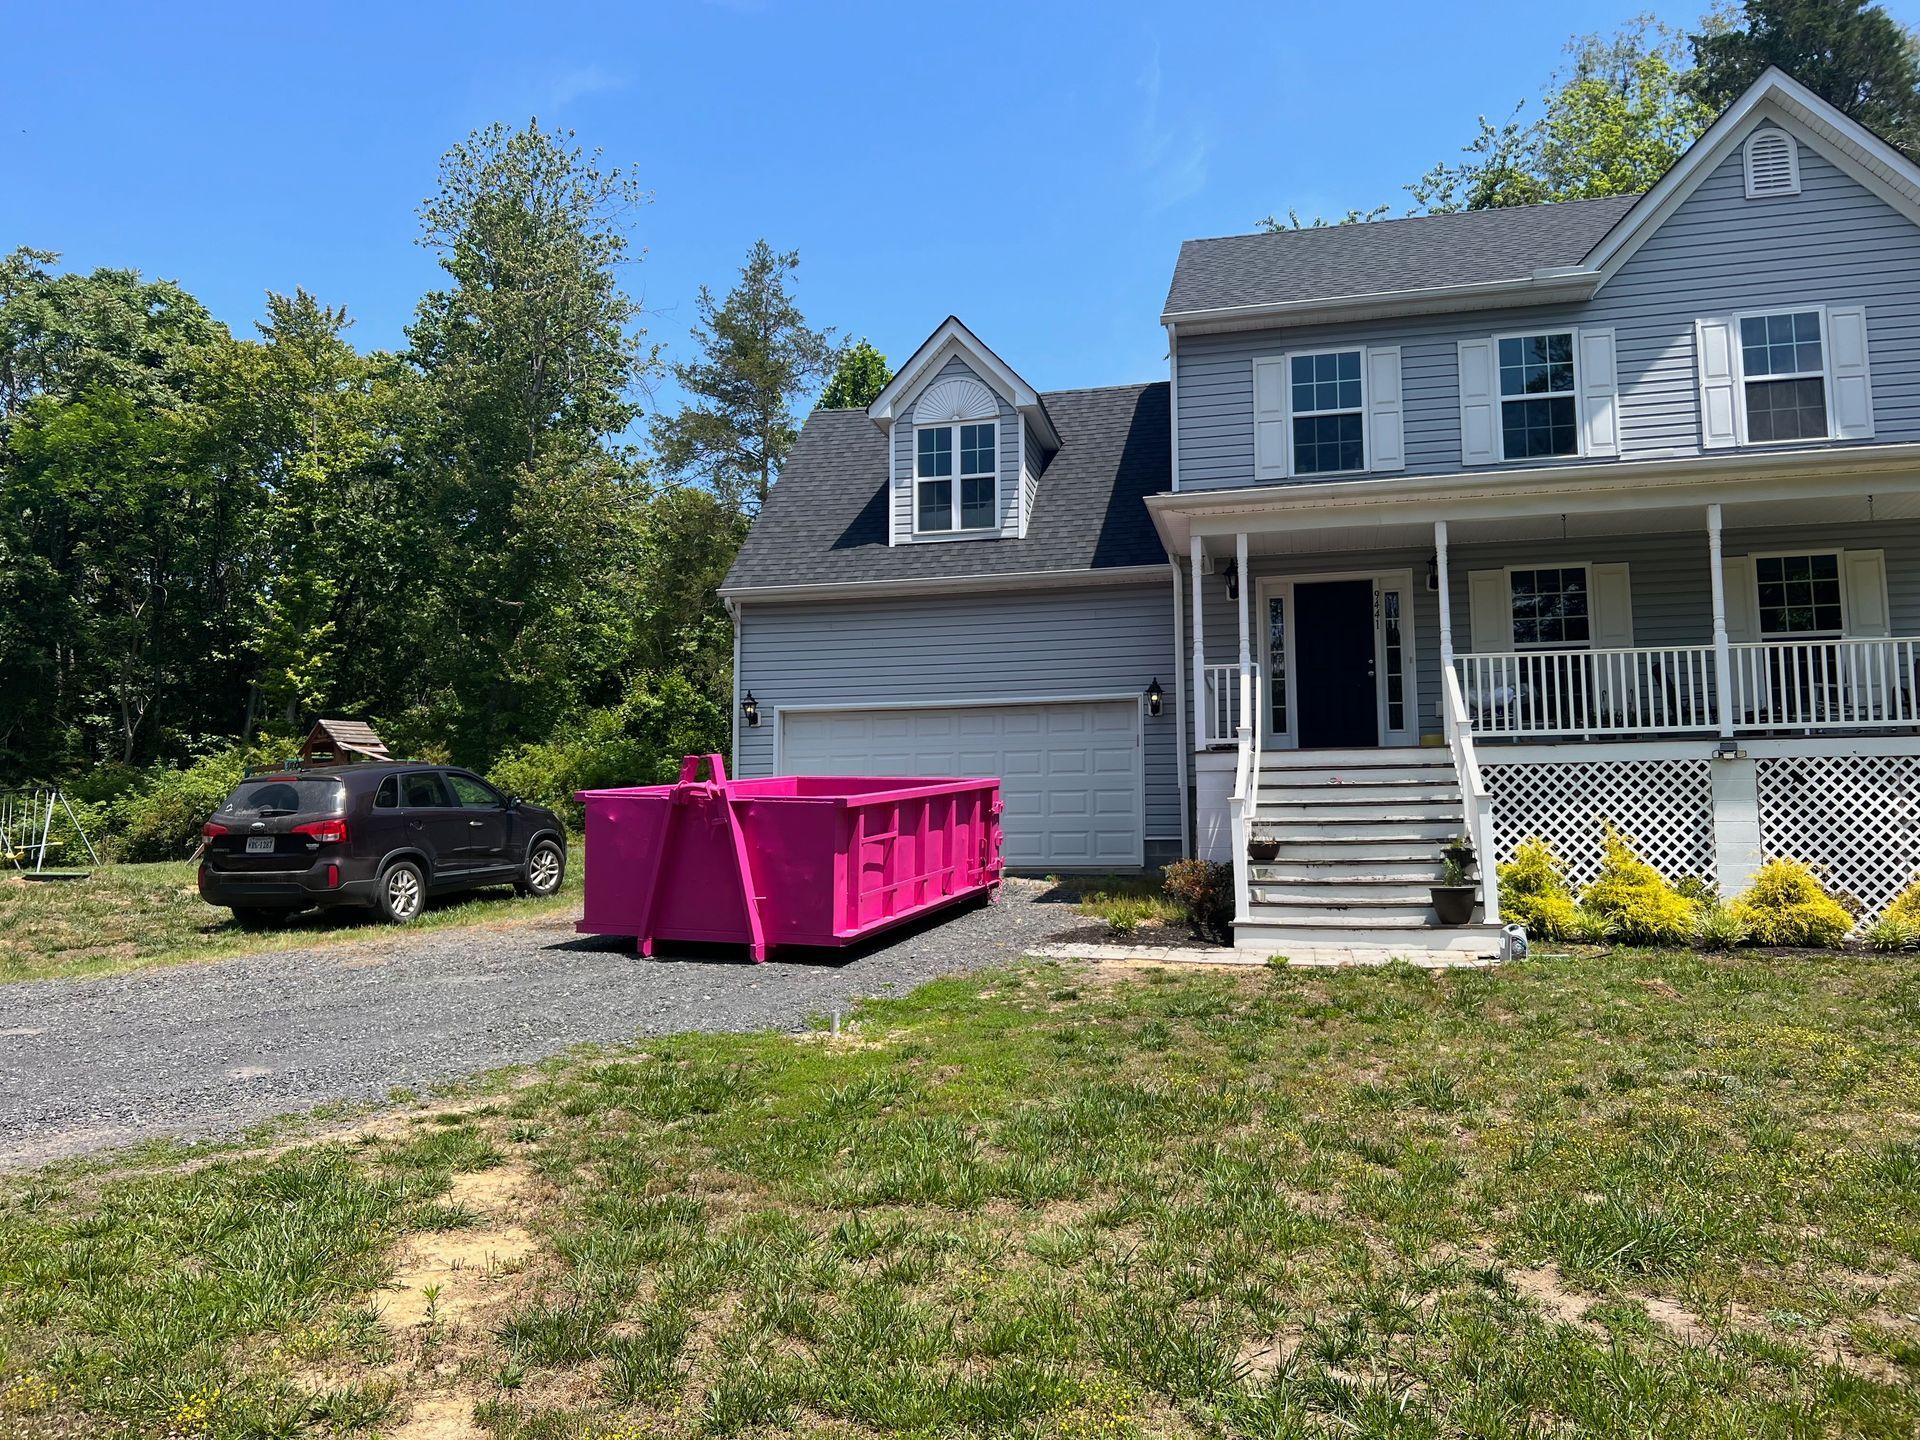 a large white house with a pink dumpster in front of it .